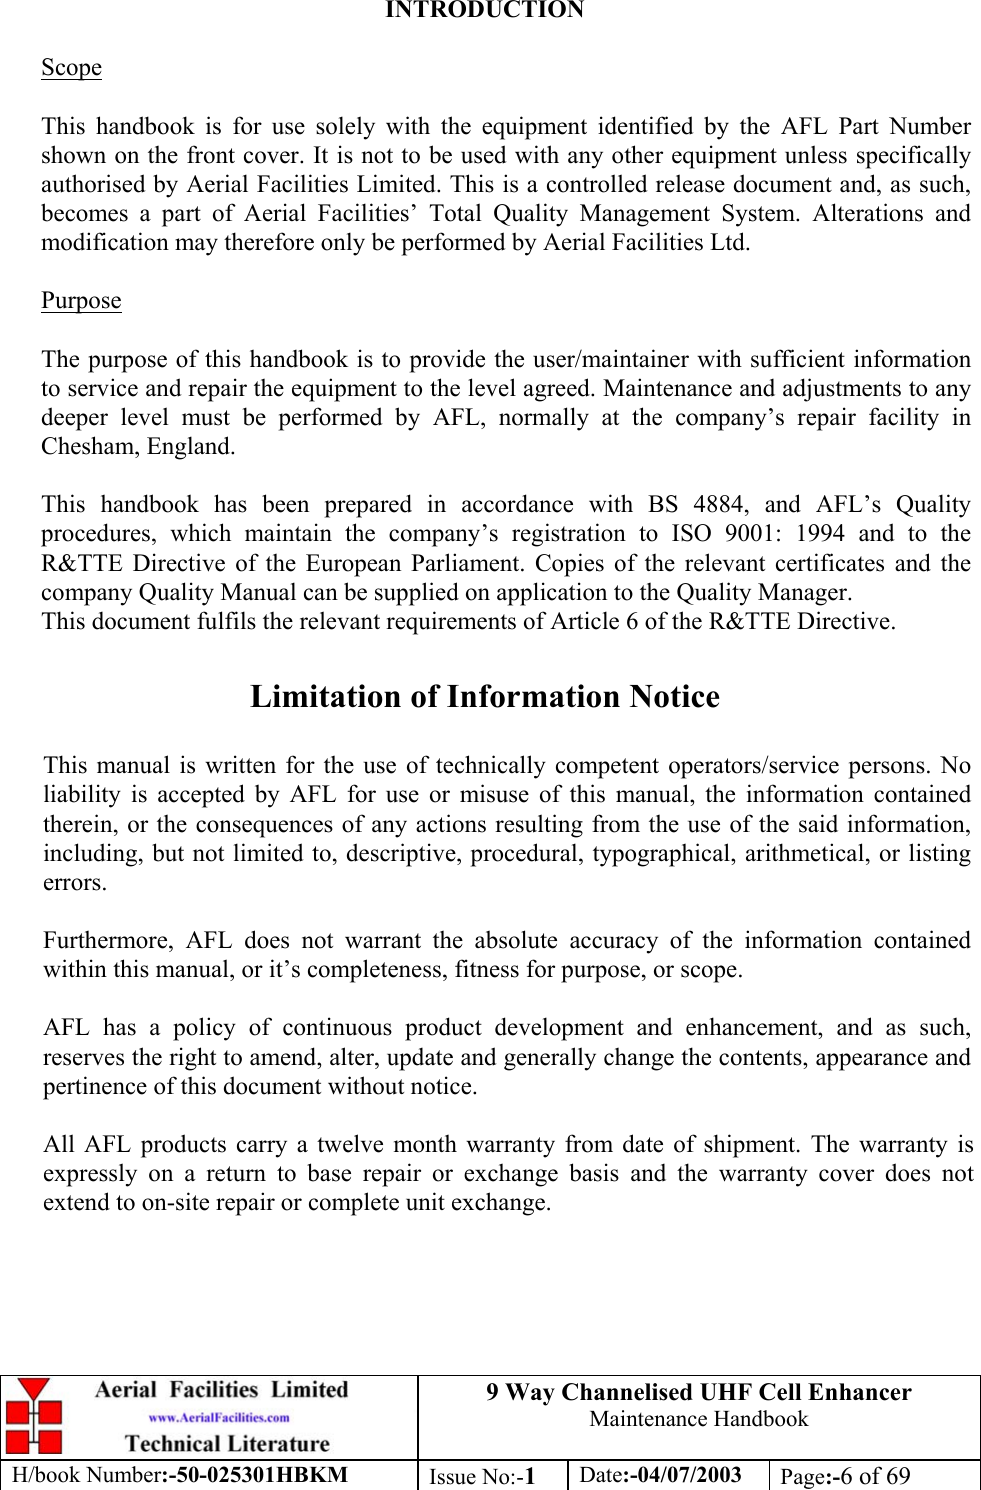 9 Way Channelised UHF Cell EnhancerMaintenance HandbookH/book Number:-50-025301HBKM Issue No:-1Date:-04/07/2003 Page:-6 of 69INTRODUCTIONScopeThis handbook is for use solely with the equipment identified by the AFL Part Numbershown on the front cover. It is not to be used with any other equipment unless specificallyauthorised by Aerial Facilities Limited. This is a controlled release document and, as such,becomes a part of Aerial Facilities’ Total Quality Management System. Alterations andmodification may therefore only be performed by Aerial Facilities Ltd.PurposeThe purpose of this handbook is to provide the user/maintainer with sufficient informationto service and repair the equipment to the level agreed. Maintenance and adjustments to anydeeper level must be performed by AFL, normally at the company’s repair facility inChesham, England.This handbook has been prepared in accordance with BS 4884, and AFL’s Qualityprocedures, which maintain the company’s registration to ISO 9001: 1994 and to theR&amp;TTE Directive of the European Parliament. Copies of the relevant certificates and thecompany Quality Manual can be supplied on application to the Quality Manager.This document fulfils the relevant requirements of Article 6 of the R&amp;TTE Directive.Limitation of Information NoticeThis manual is written for the use of technically competent operators/service persons. Noliability is accepted by AFL for use or misuse of this manual, the information containedtherein, or the consequences of any actions resulting from the use of the said information,including, but not limited to, descriptive, procedural, typographical, arithmetical, or listingerrors.Furthermore, AFL does not warrant the absolute accuracy of the information containedwithin this manual, or it’s completeness, fitness for purpose, or scope.AFL has a policy of continuous product development and enhancement, and as such,reserves the right to amend, alter, update and generally change the contents, appearance andpertinence of this document without notice.All AFL products carry a twelve month warranty from date of shipment. The warranty isexpressly on a return to base repair or exchange basis and the warranty cover does notextend to on-site repair or complete unit exchange.